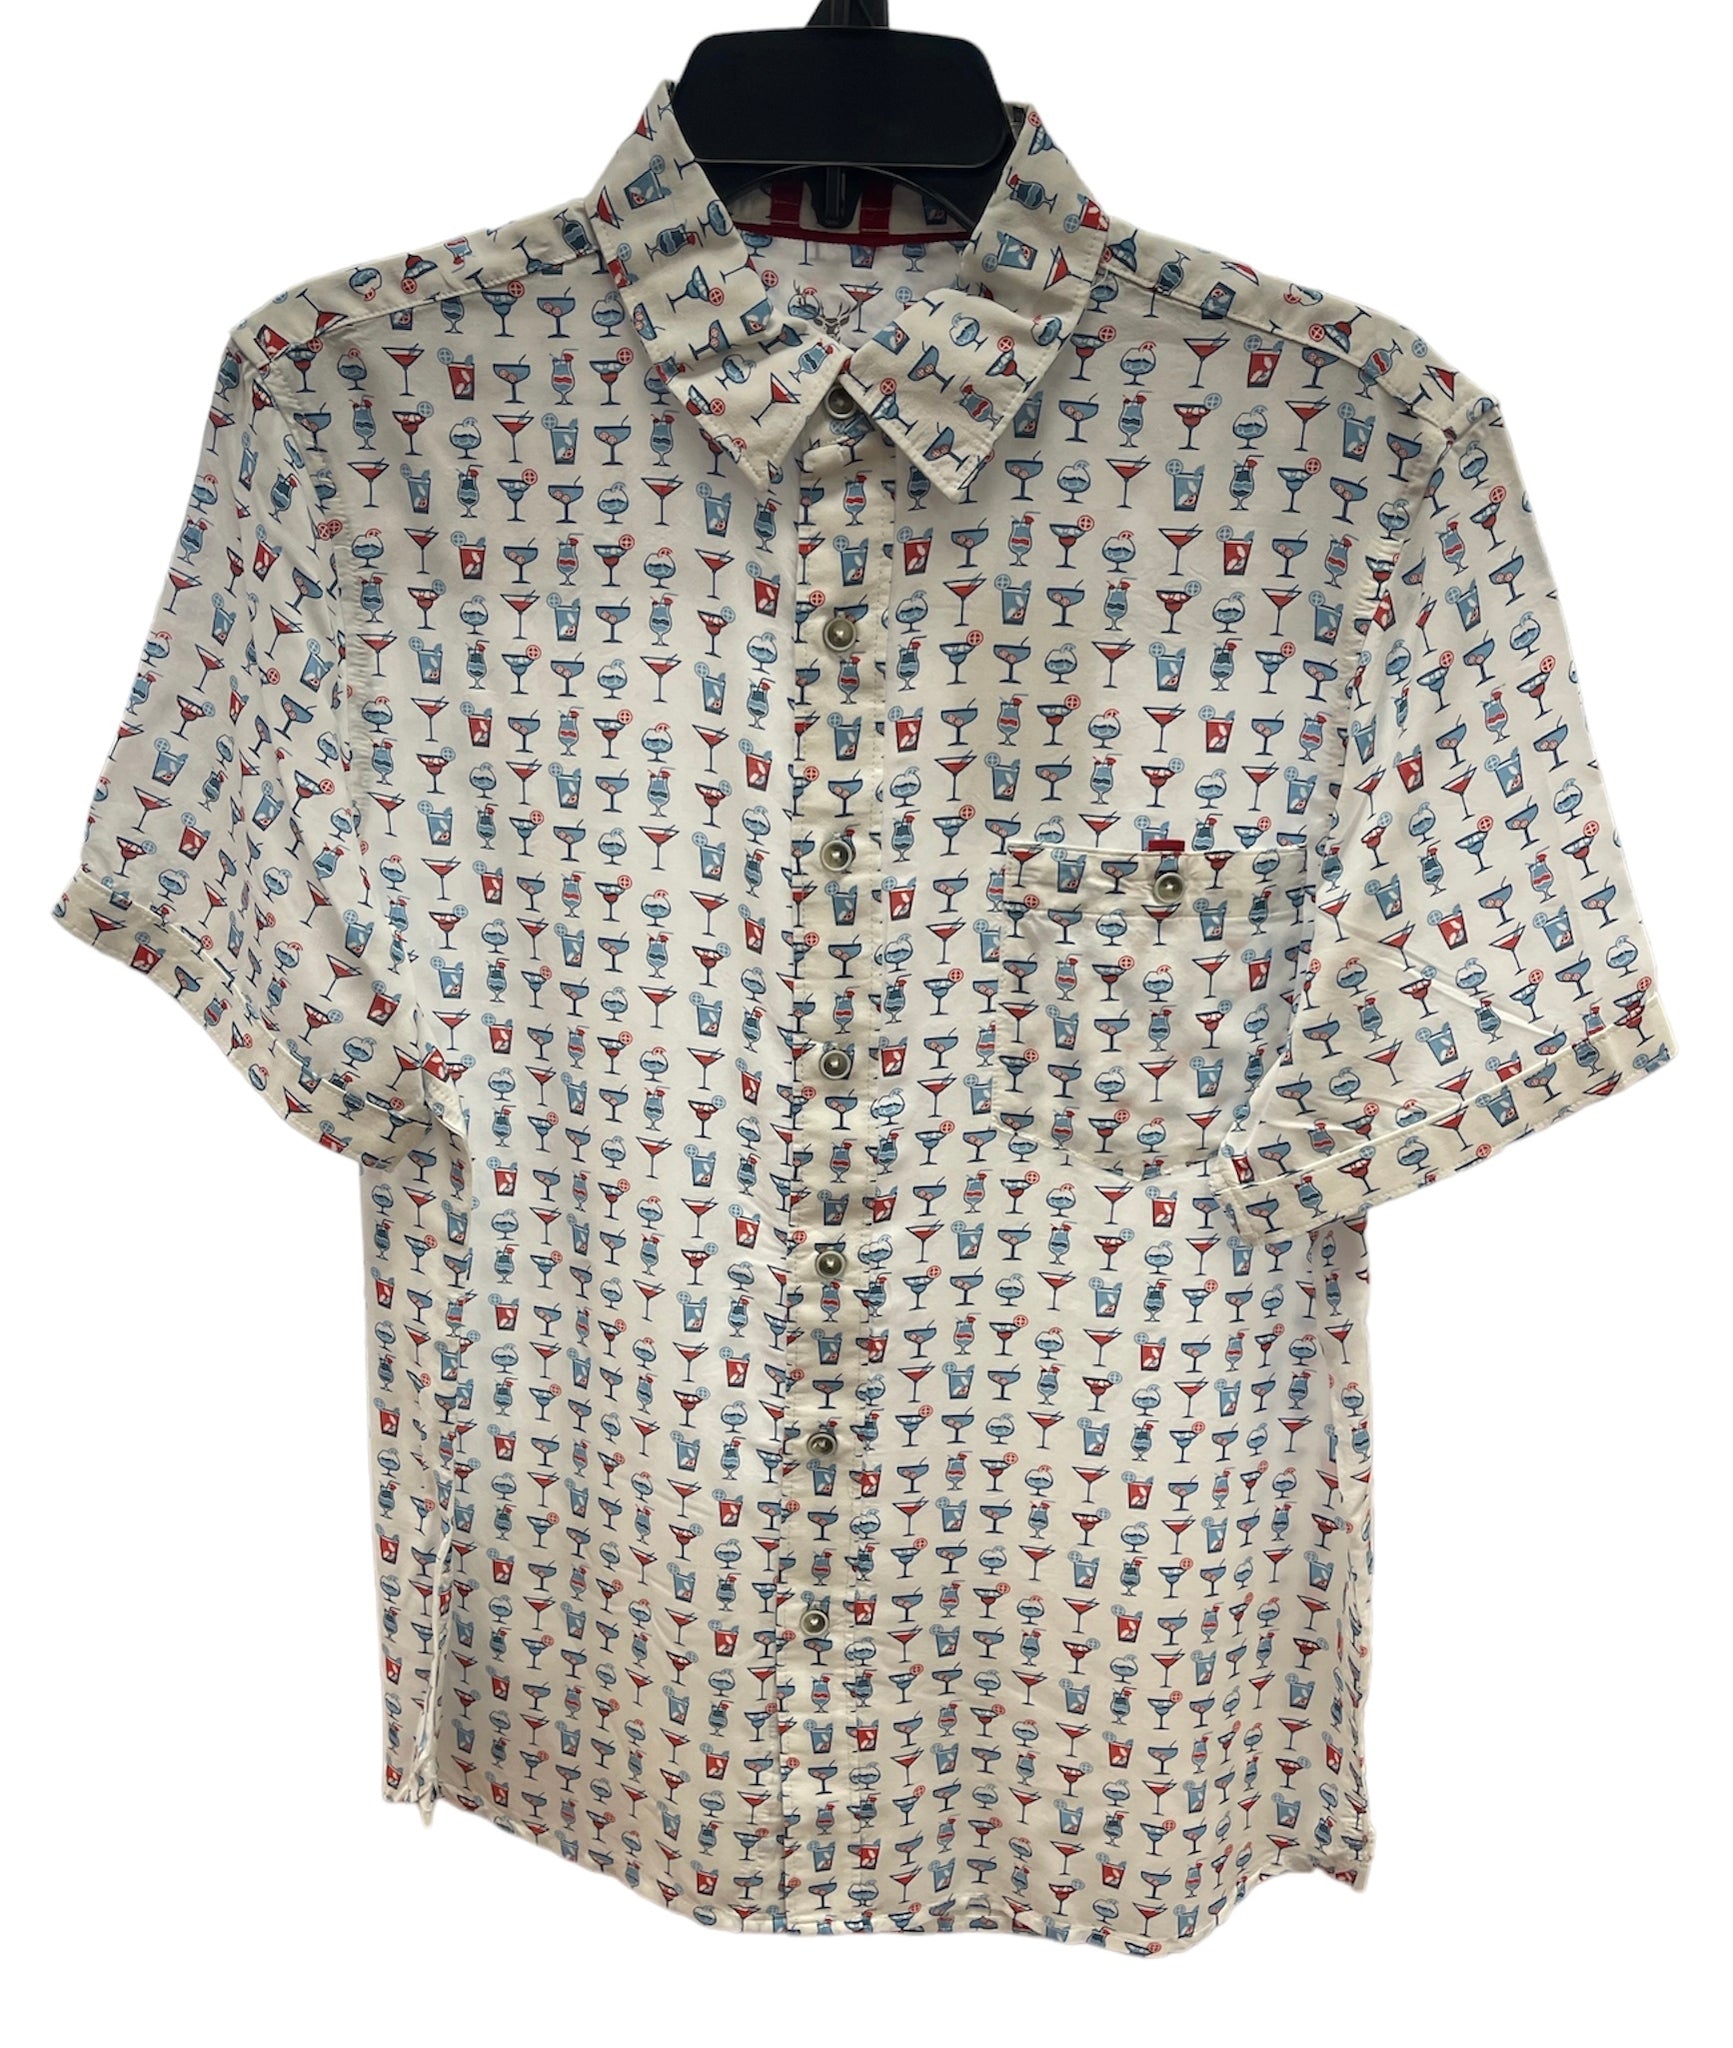 SS PRINT BUTTON UP - COCKTAIL